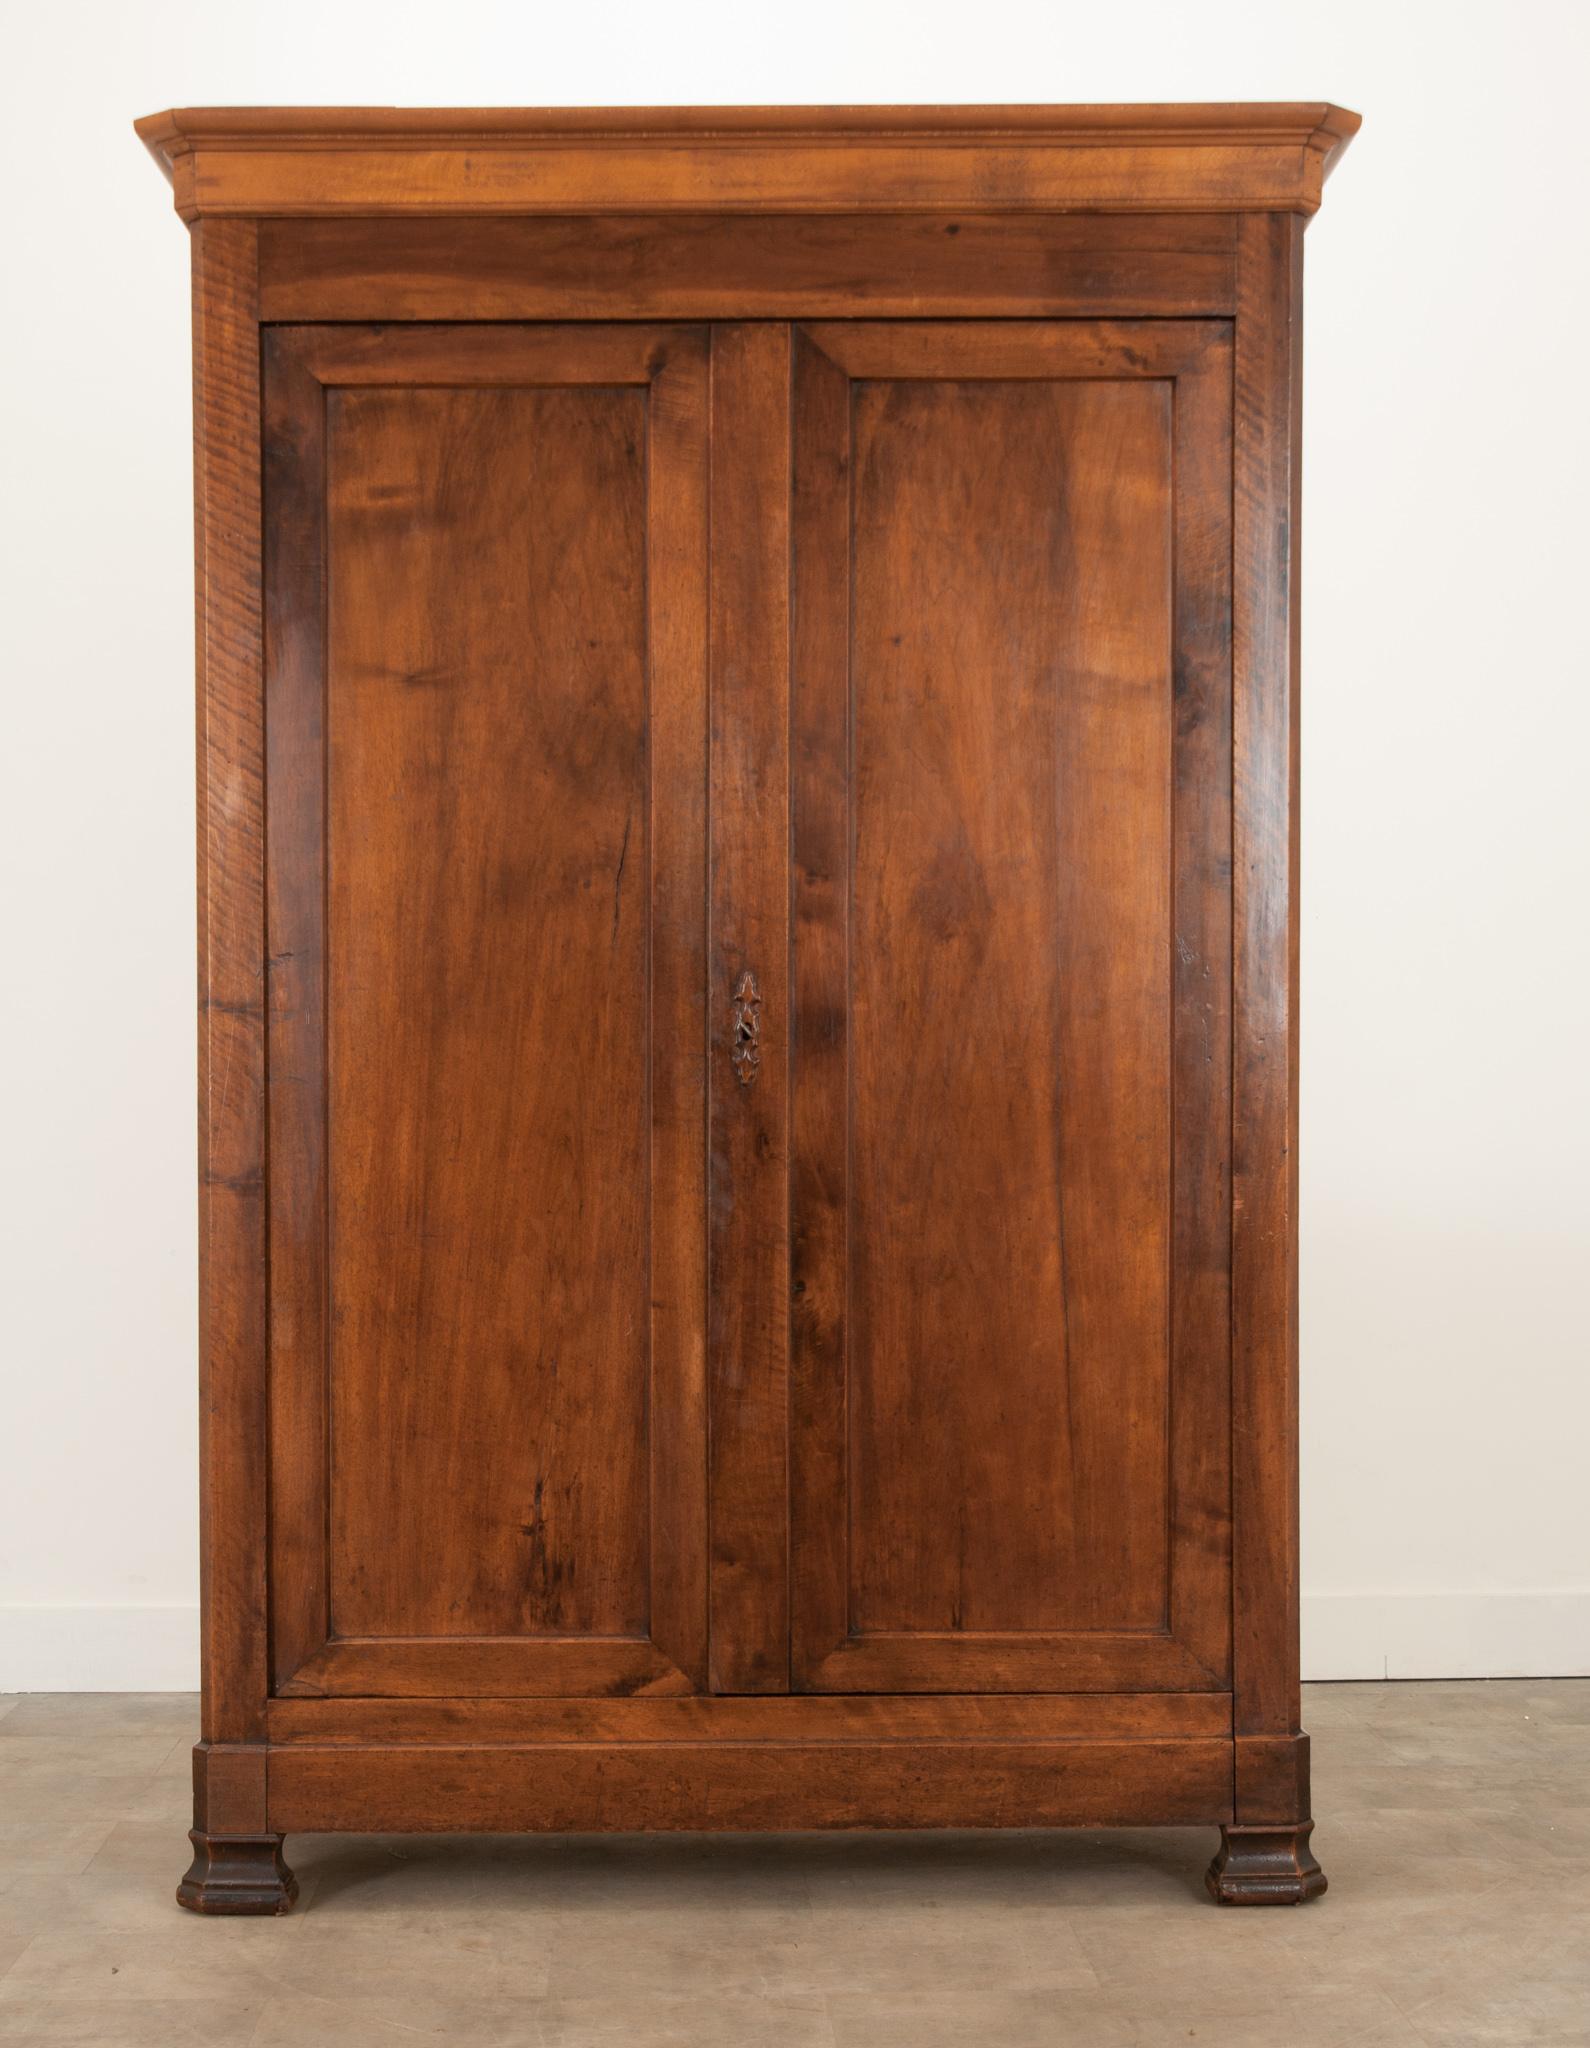 A refined armoire built in France during the 1830’s from solid walnut, in the style of Louis Philippe. A carved escutcheon plate graces the paneled doors, which unlock to reveal a nicely sized storage cavity. One fixed key is included. Three